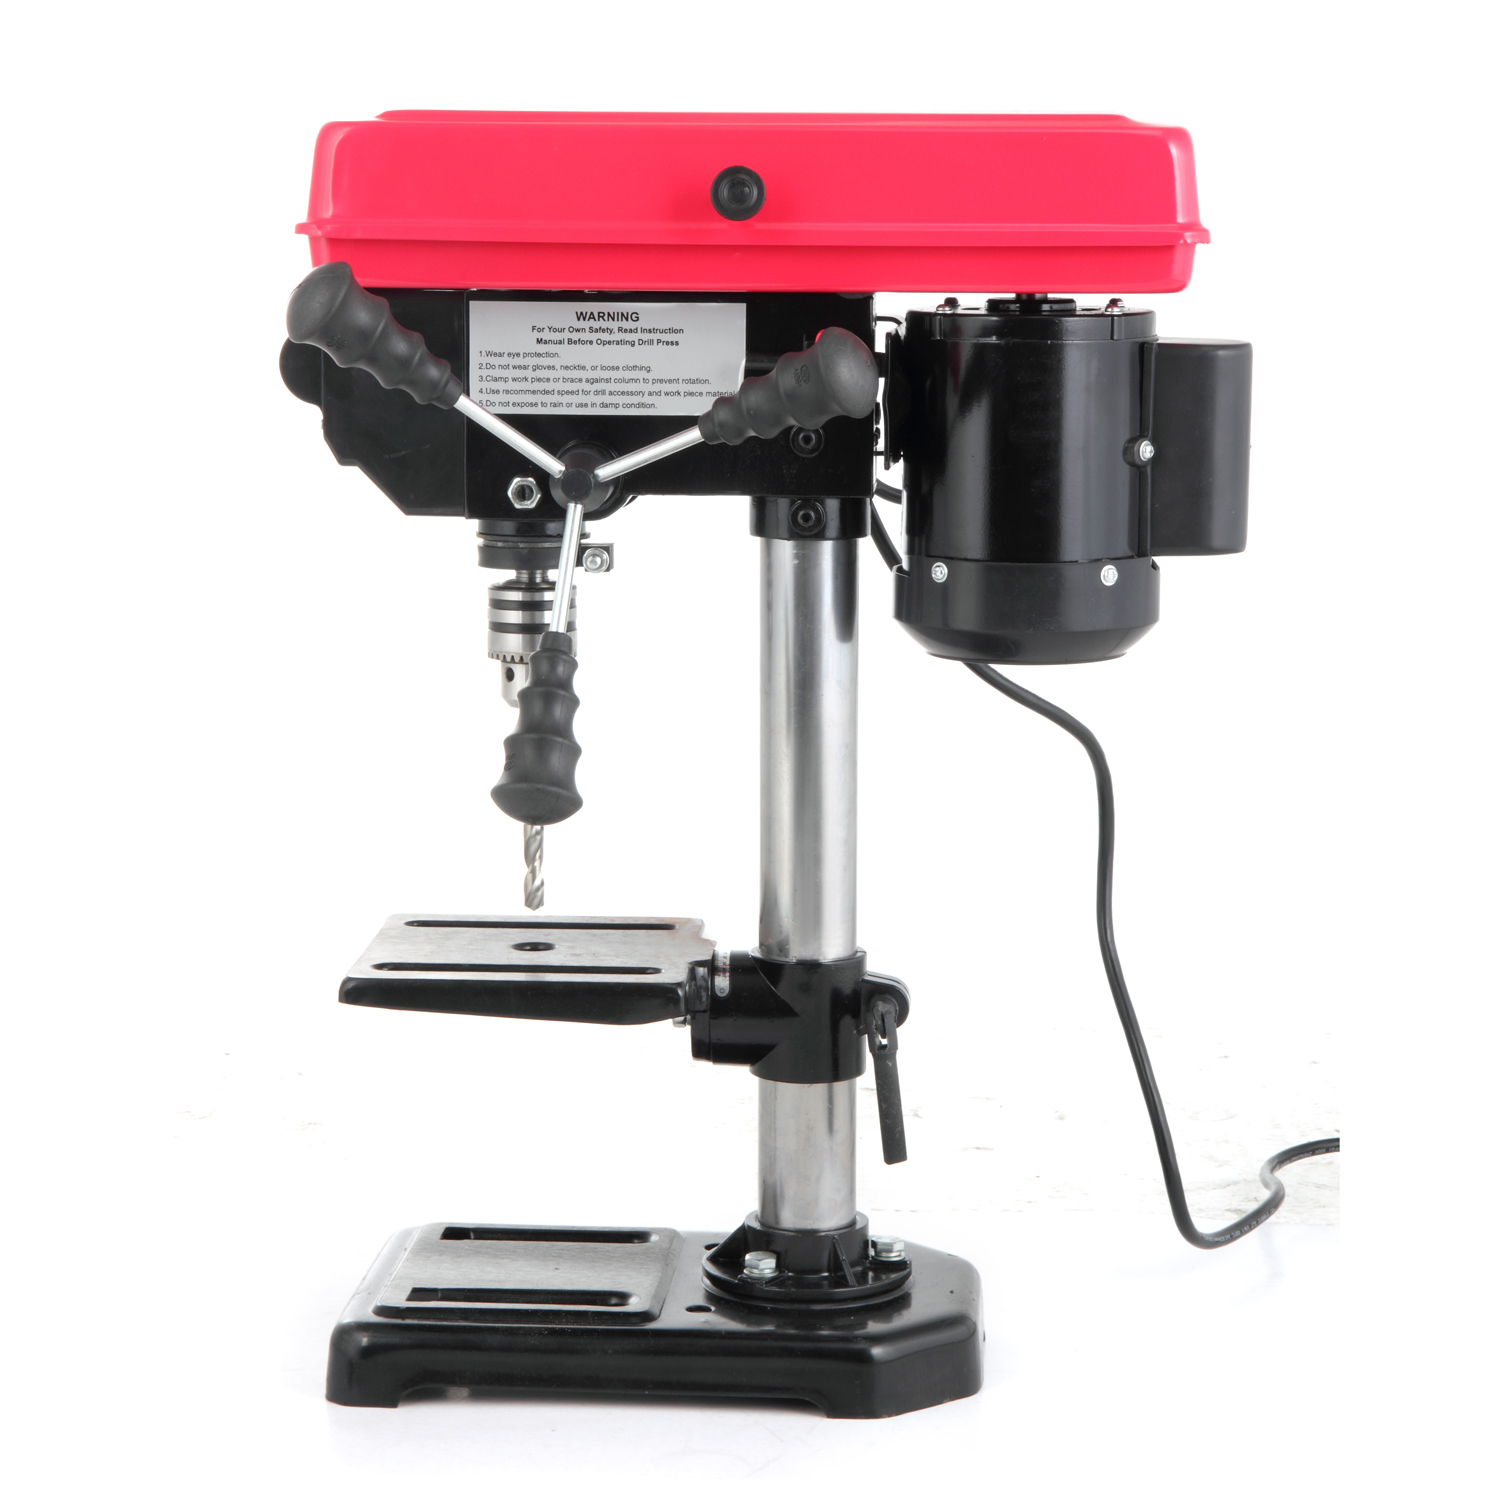 Hyper Tough 2.4 AMP Corded 8 inch Drill Press, 1/2 inch Chuck, 5 Speed with Depth Stop and Three Stem Handle - image 5 of 11